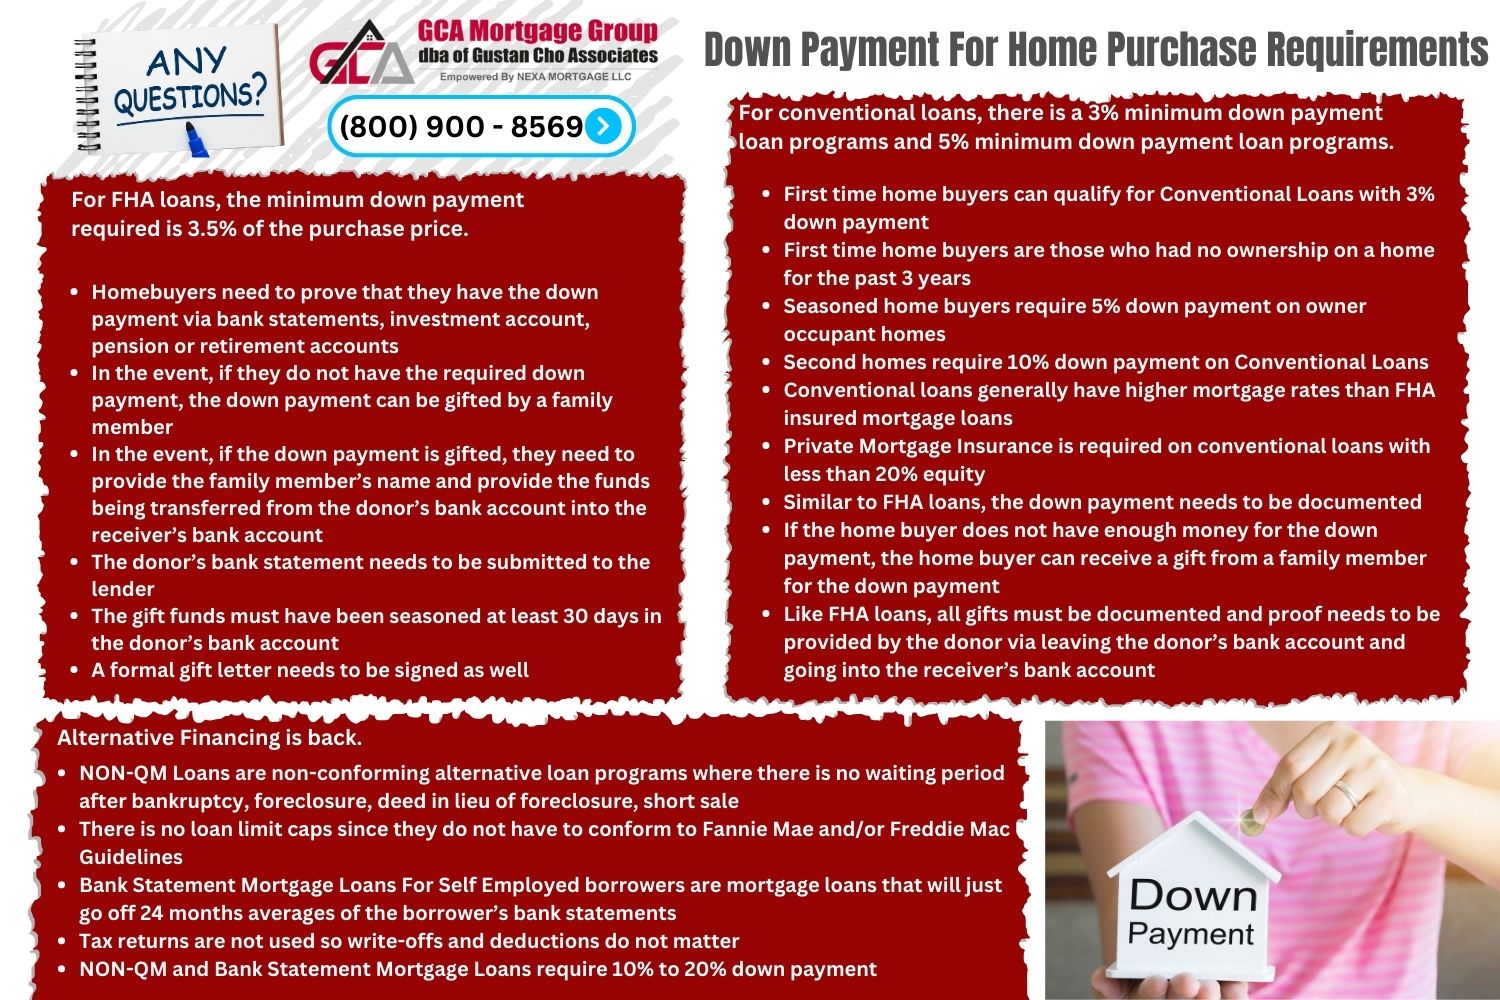 Down Payment For Home Purchase Requirements